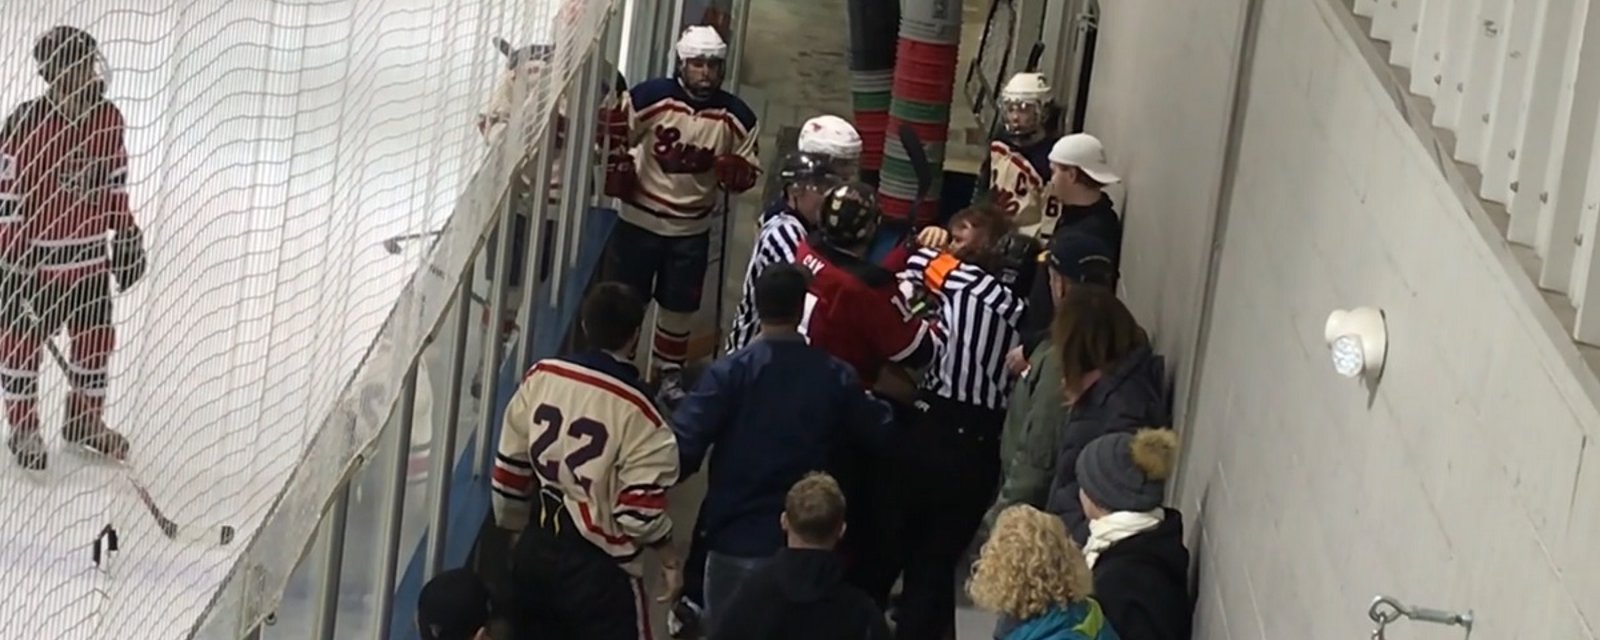 College hockey fight betwene SMU and Texas Tech spills off the ice.